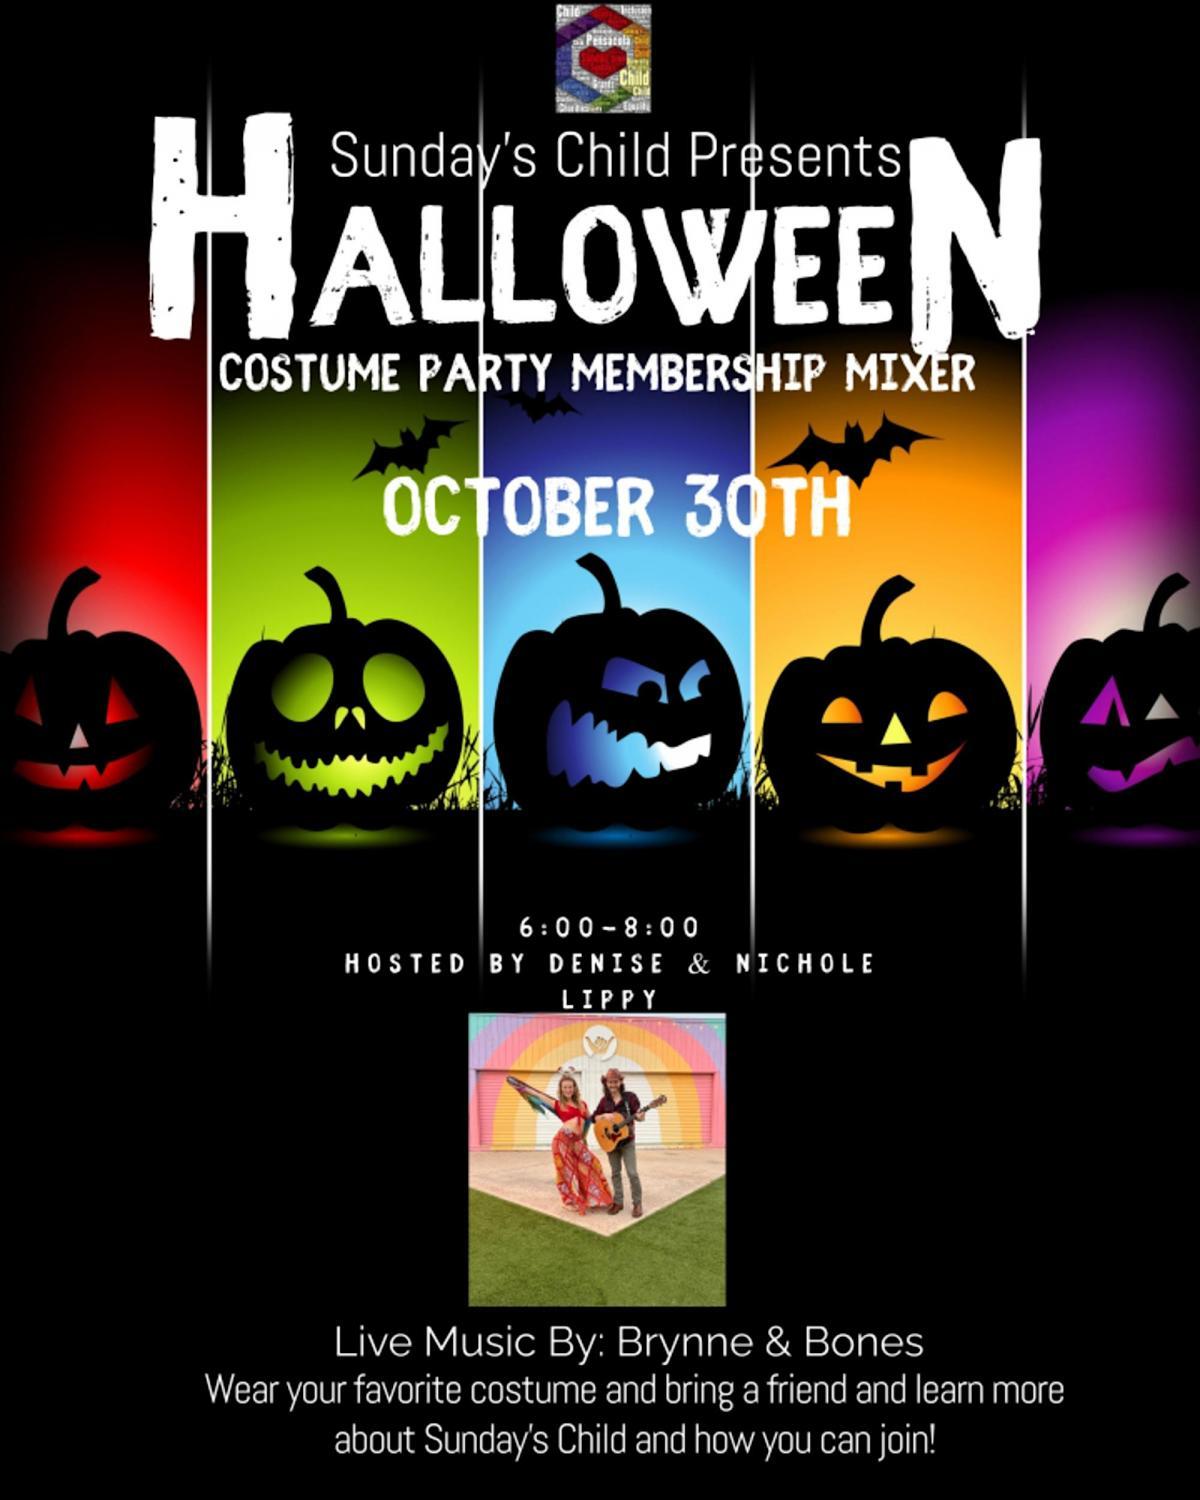 Halloween Costume Party Mixer
Sun Oct 30, 7:00 PM - Sun Oct 30, 7:00 PM
in 11 days